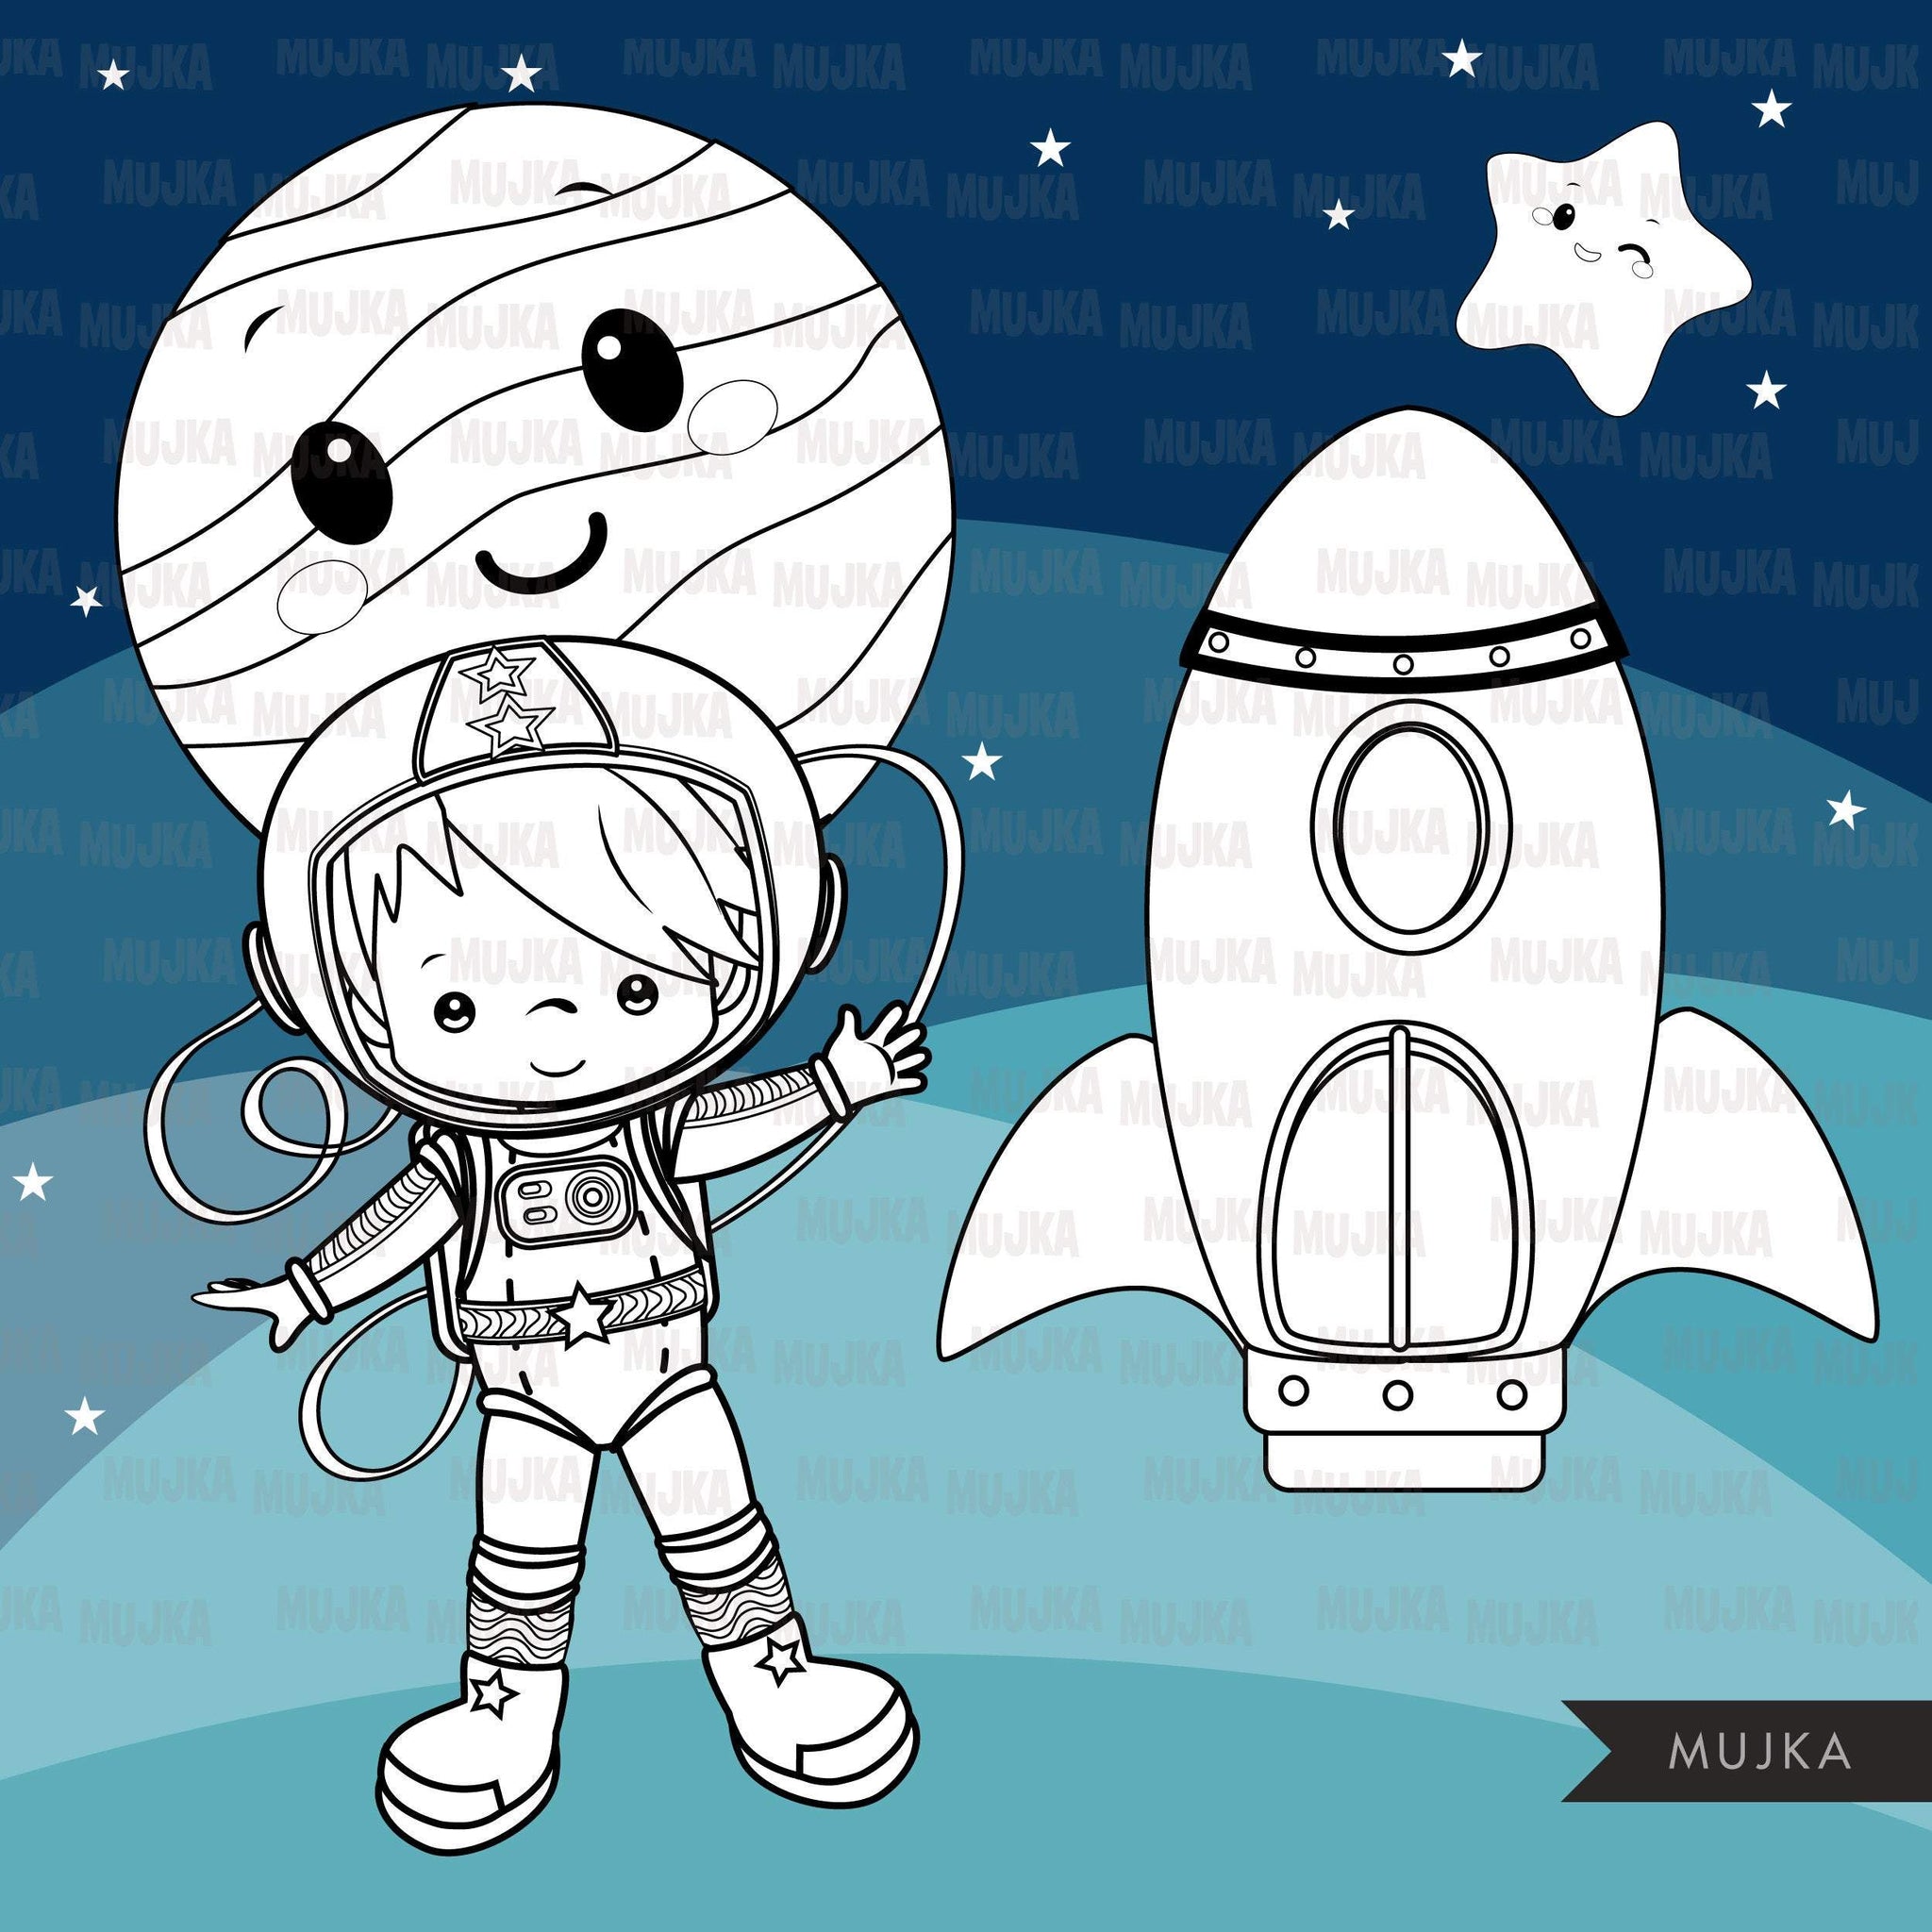 Space astronauts Digital stamps, planets, mars, jupiter, saturn, space rocket graphics, coloring book black and white outline clip art